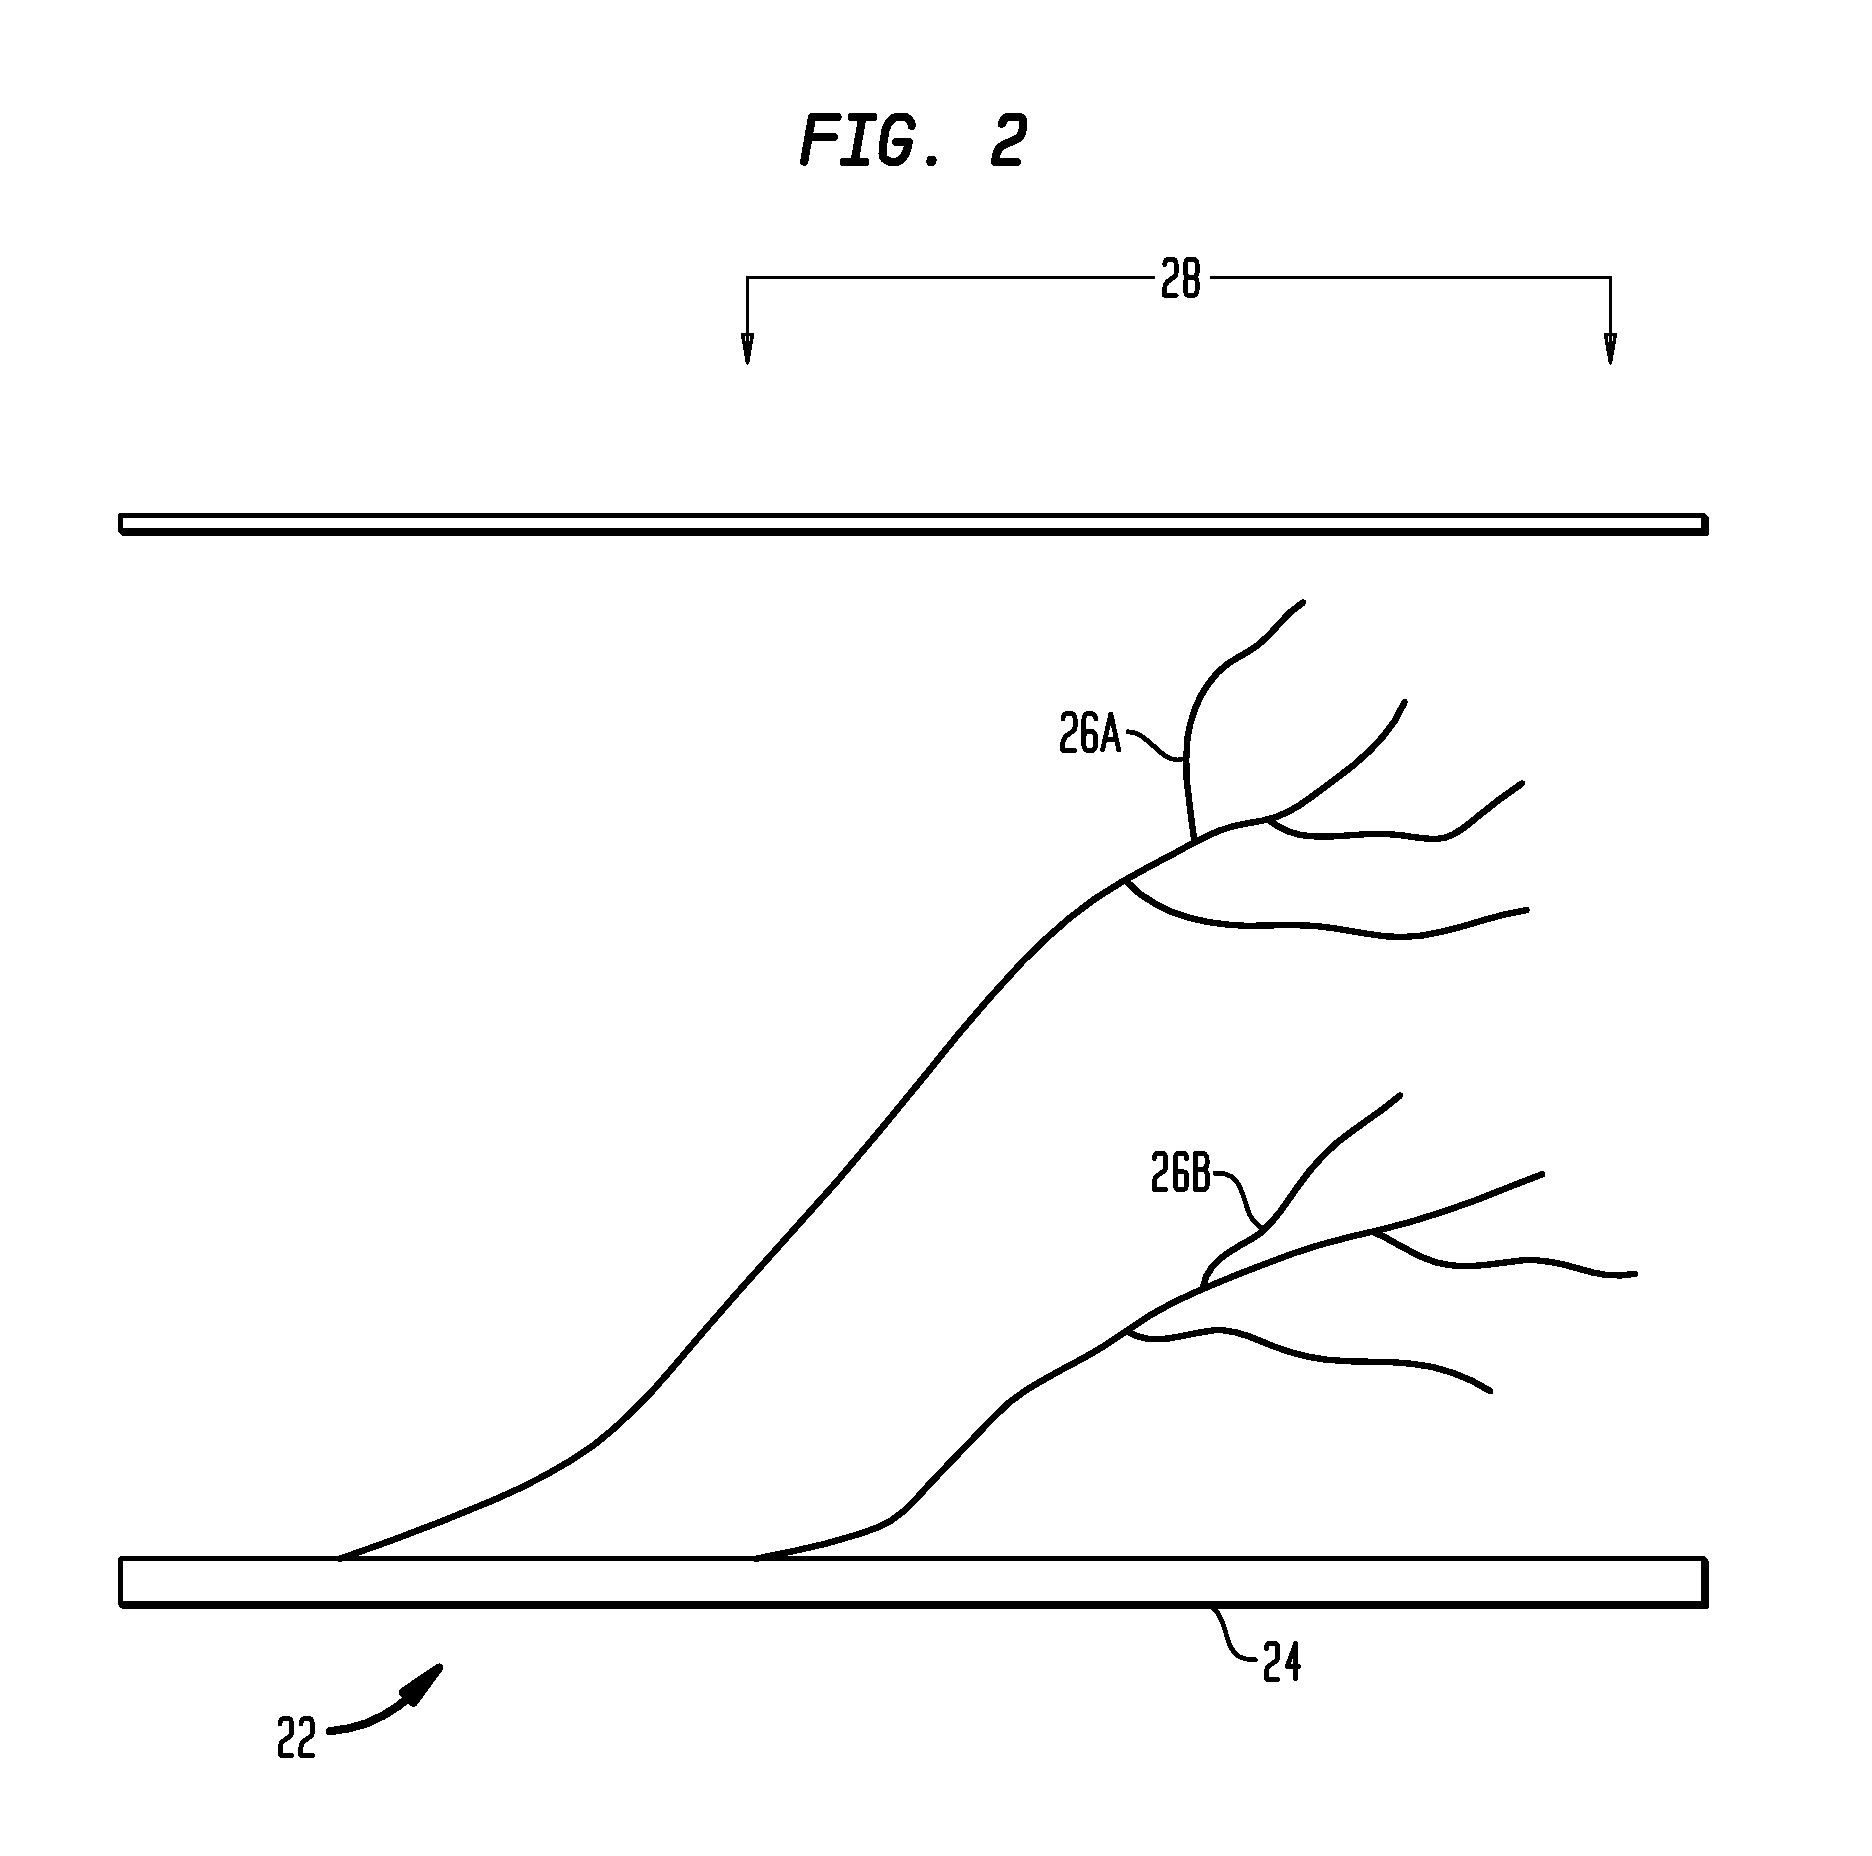 Dermatome stimulation devices and methods